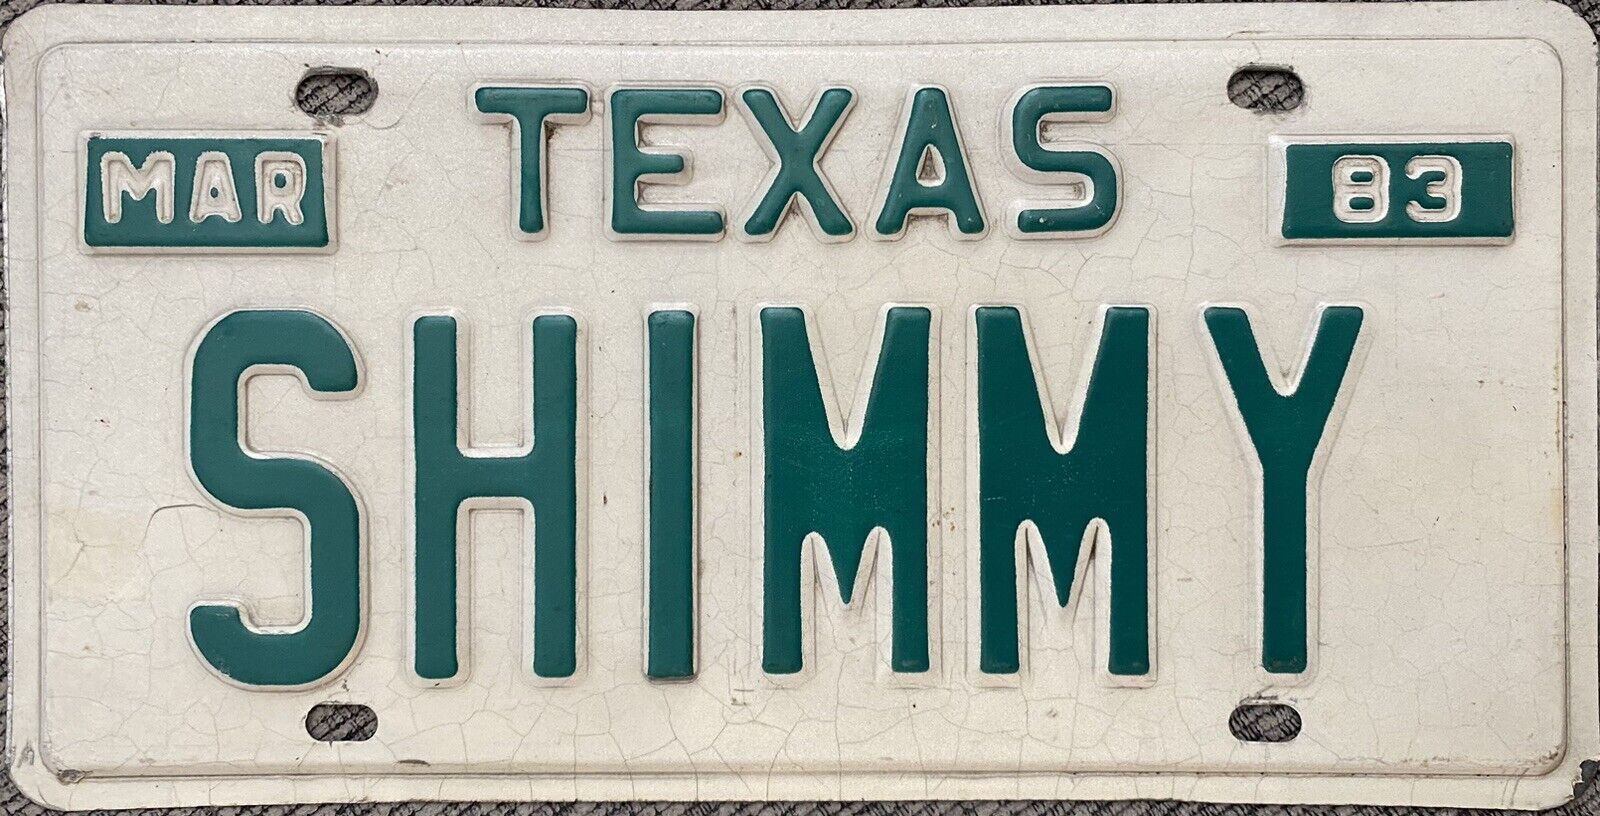 VINTAGE 1983 Texas Vanity SHIMMY License Plate EXPIRED